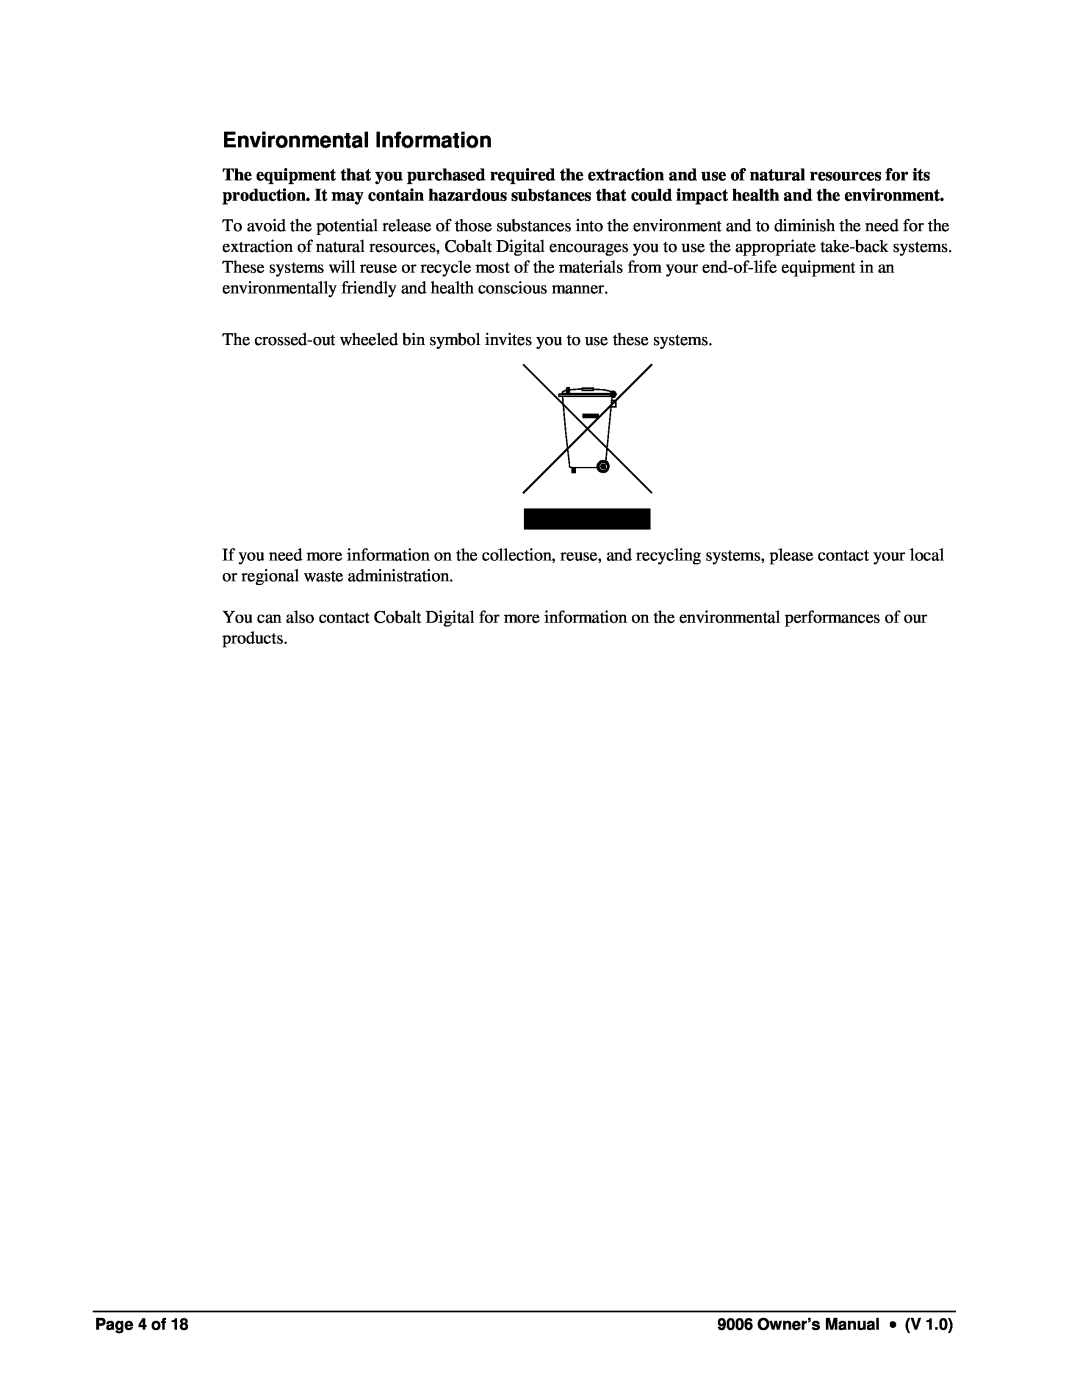 Cobalt Networks 9006 owner manual Environmental Information, Page 4 of 